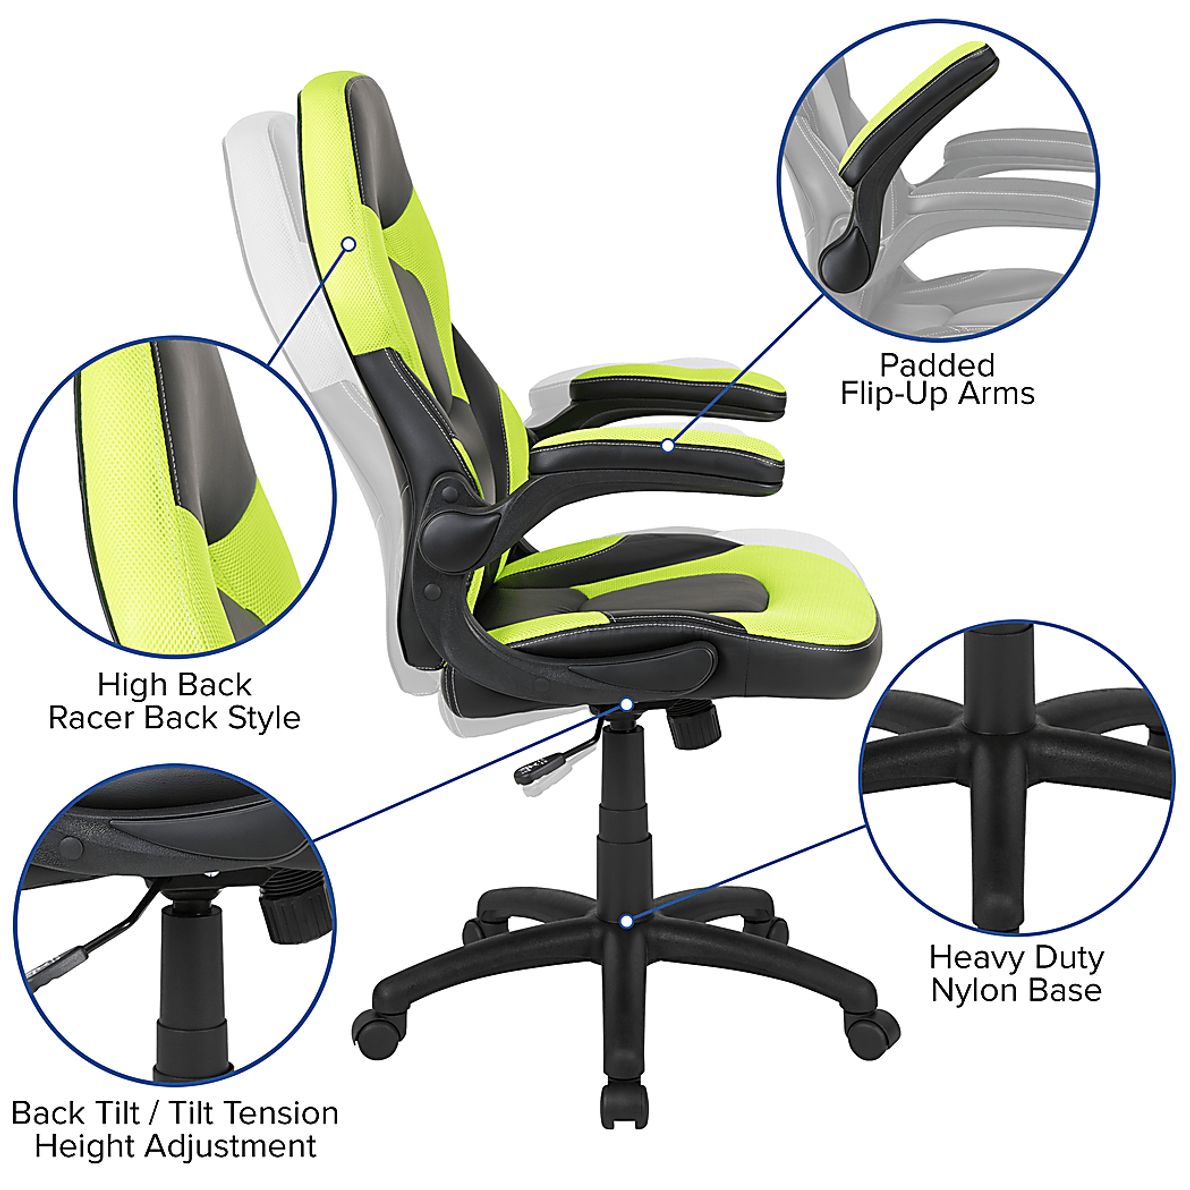 Kids Turole Red/Lime Gaming Desk and Chair Set